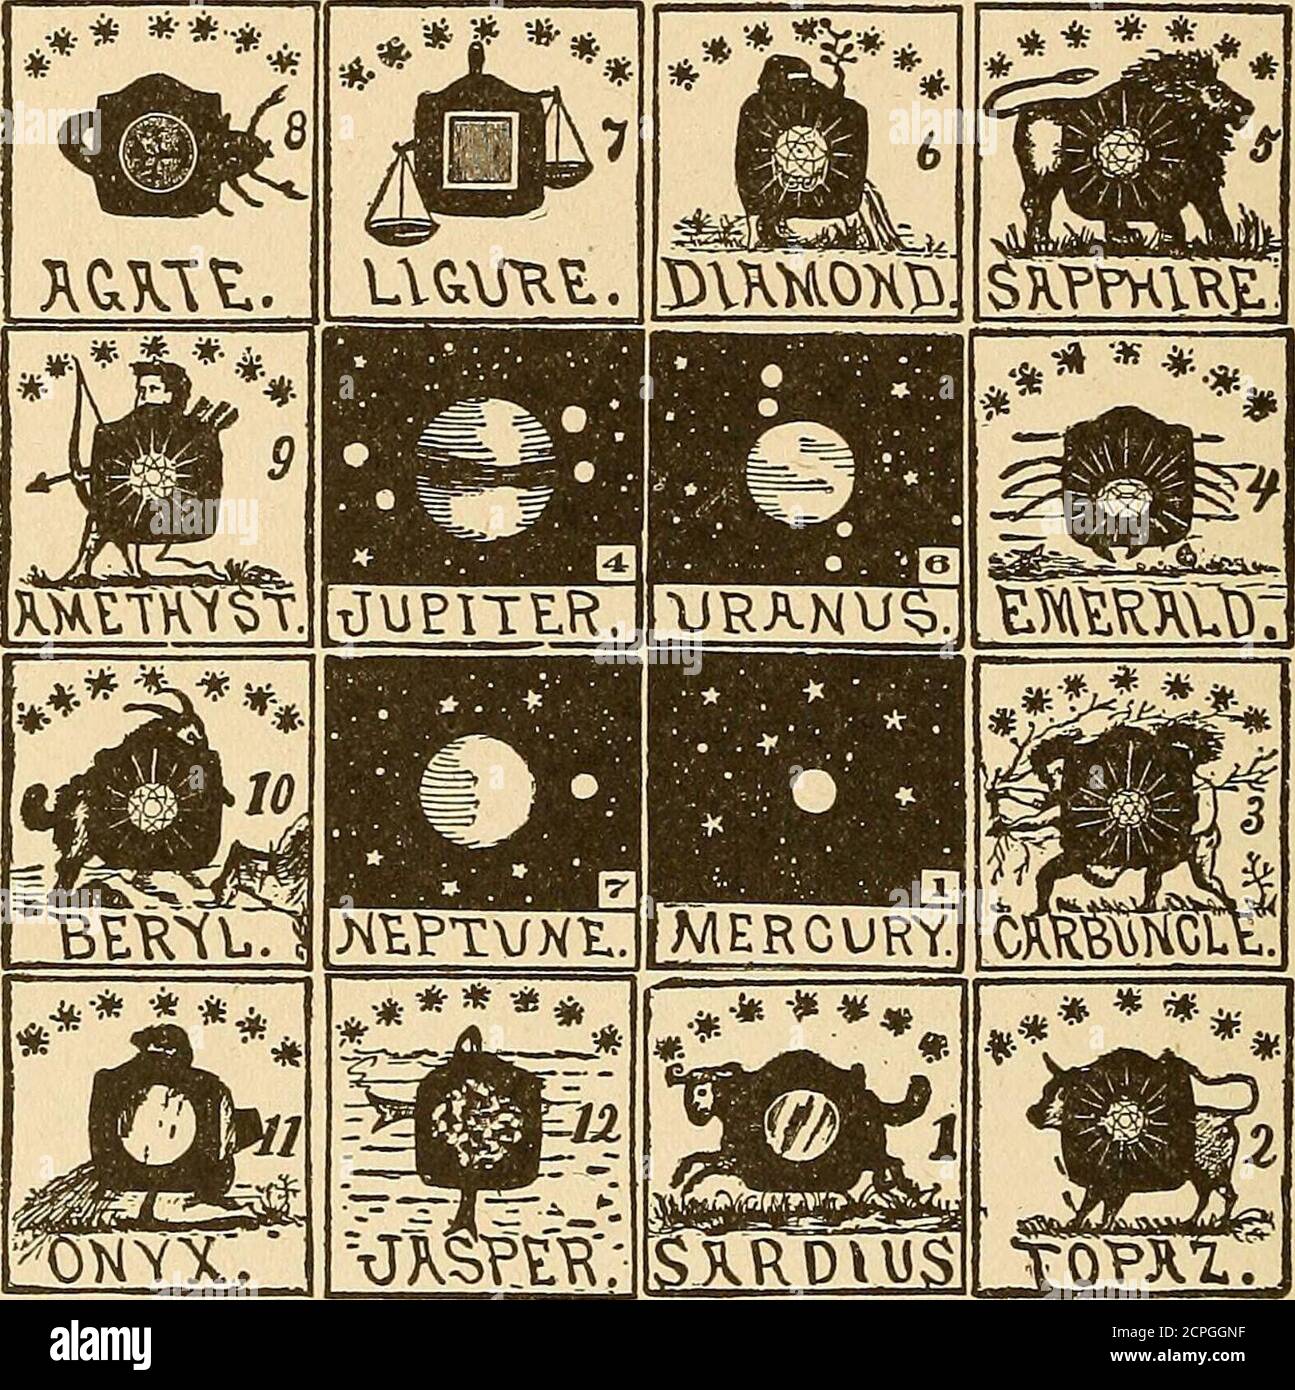 . The mystic test book; or, The magic of the cards. Giving the mystic meaning of these wonderful and ancient emblems in their relationship to the heavenly bodies, under all conditions; with rules and processes for reading or delineating the emblems . THE TWELVE DISCIPLES. Venus, in the heart quarter, representing love and friend-ship; Terra, the Earth, power under clubs; Neptune, repre-senting the diamond quarter, as a diamond ruler; Saturnagain signifying death. The next cut represents the twelve stones in the breastplate of the High Priest. There are just seven stones, ruledby the seven plan Stock Photo